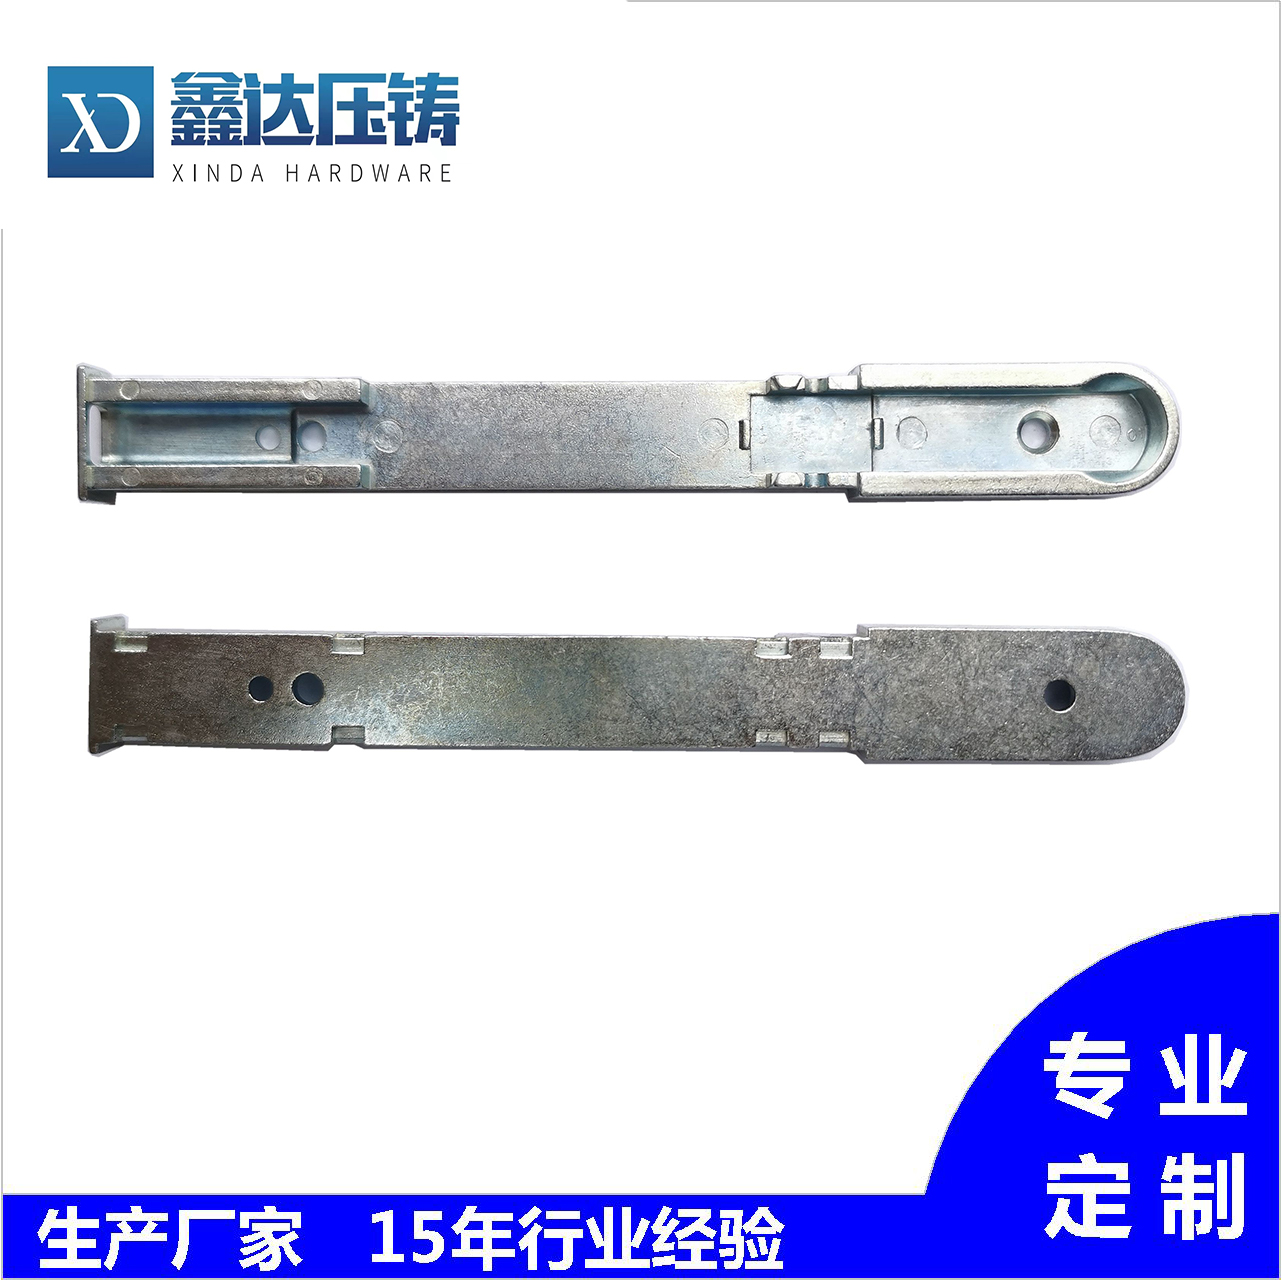 Customized processing of door lock zinc alloy accessories with samples, drawings, and non-standard products of die-casting doors and windows